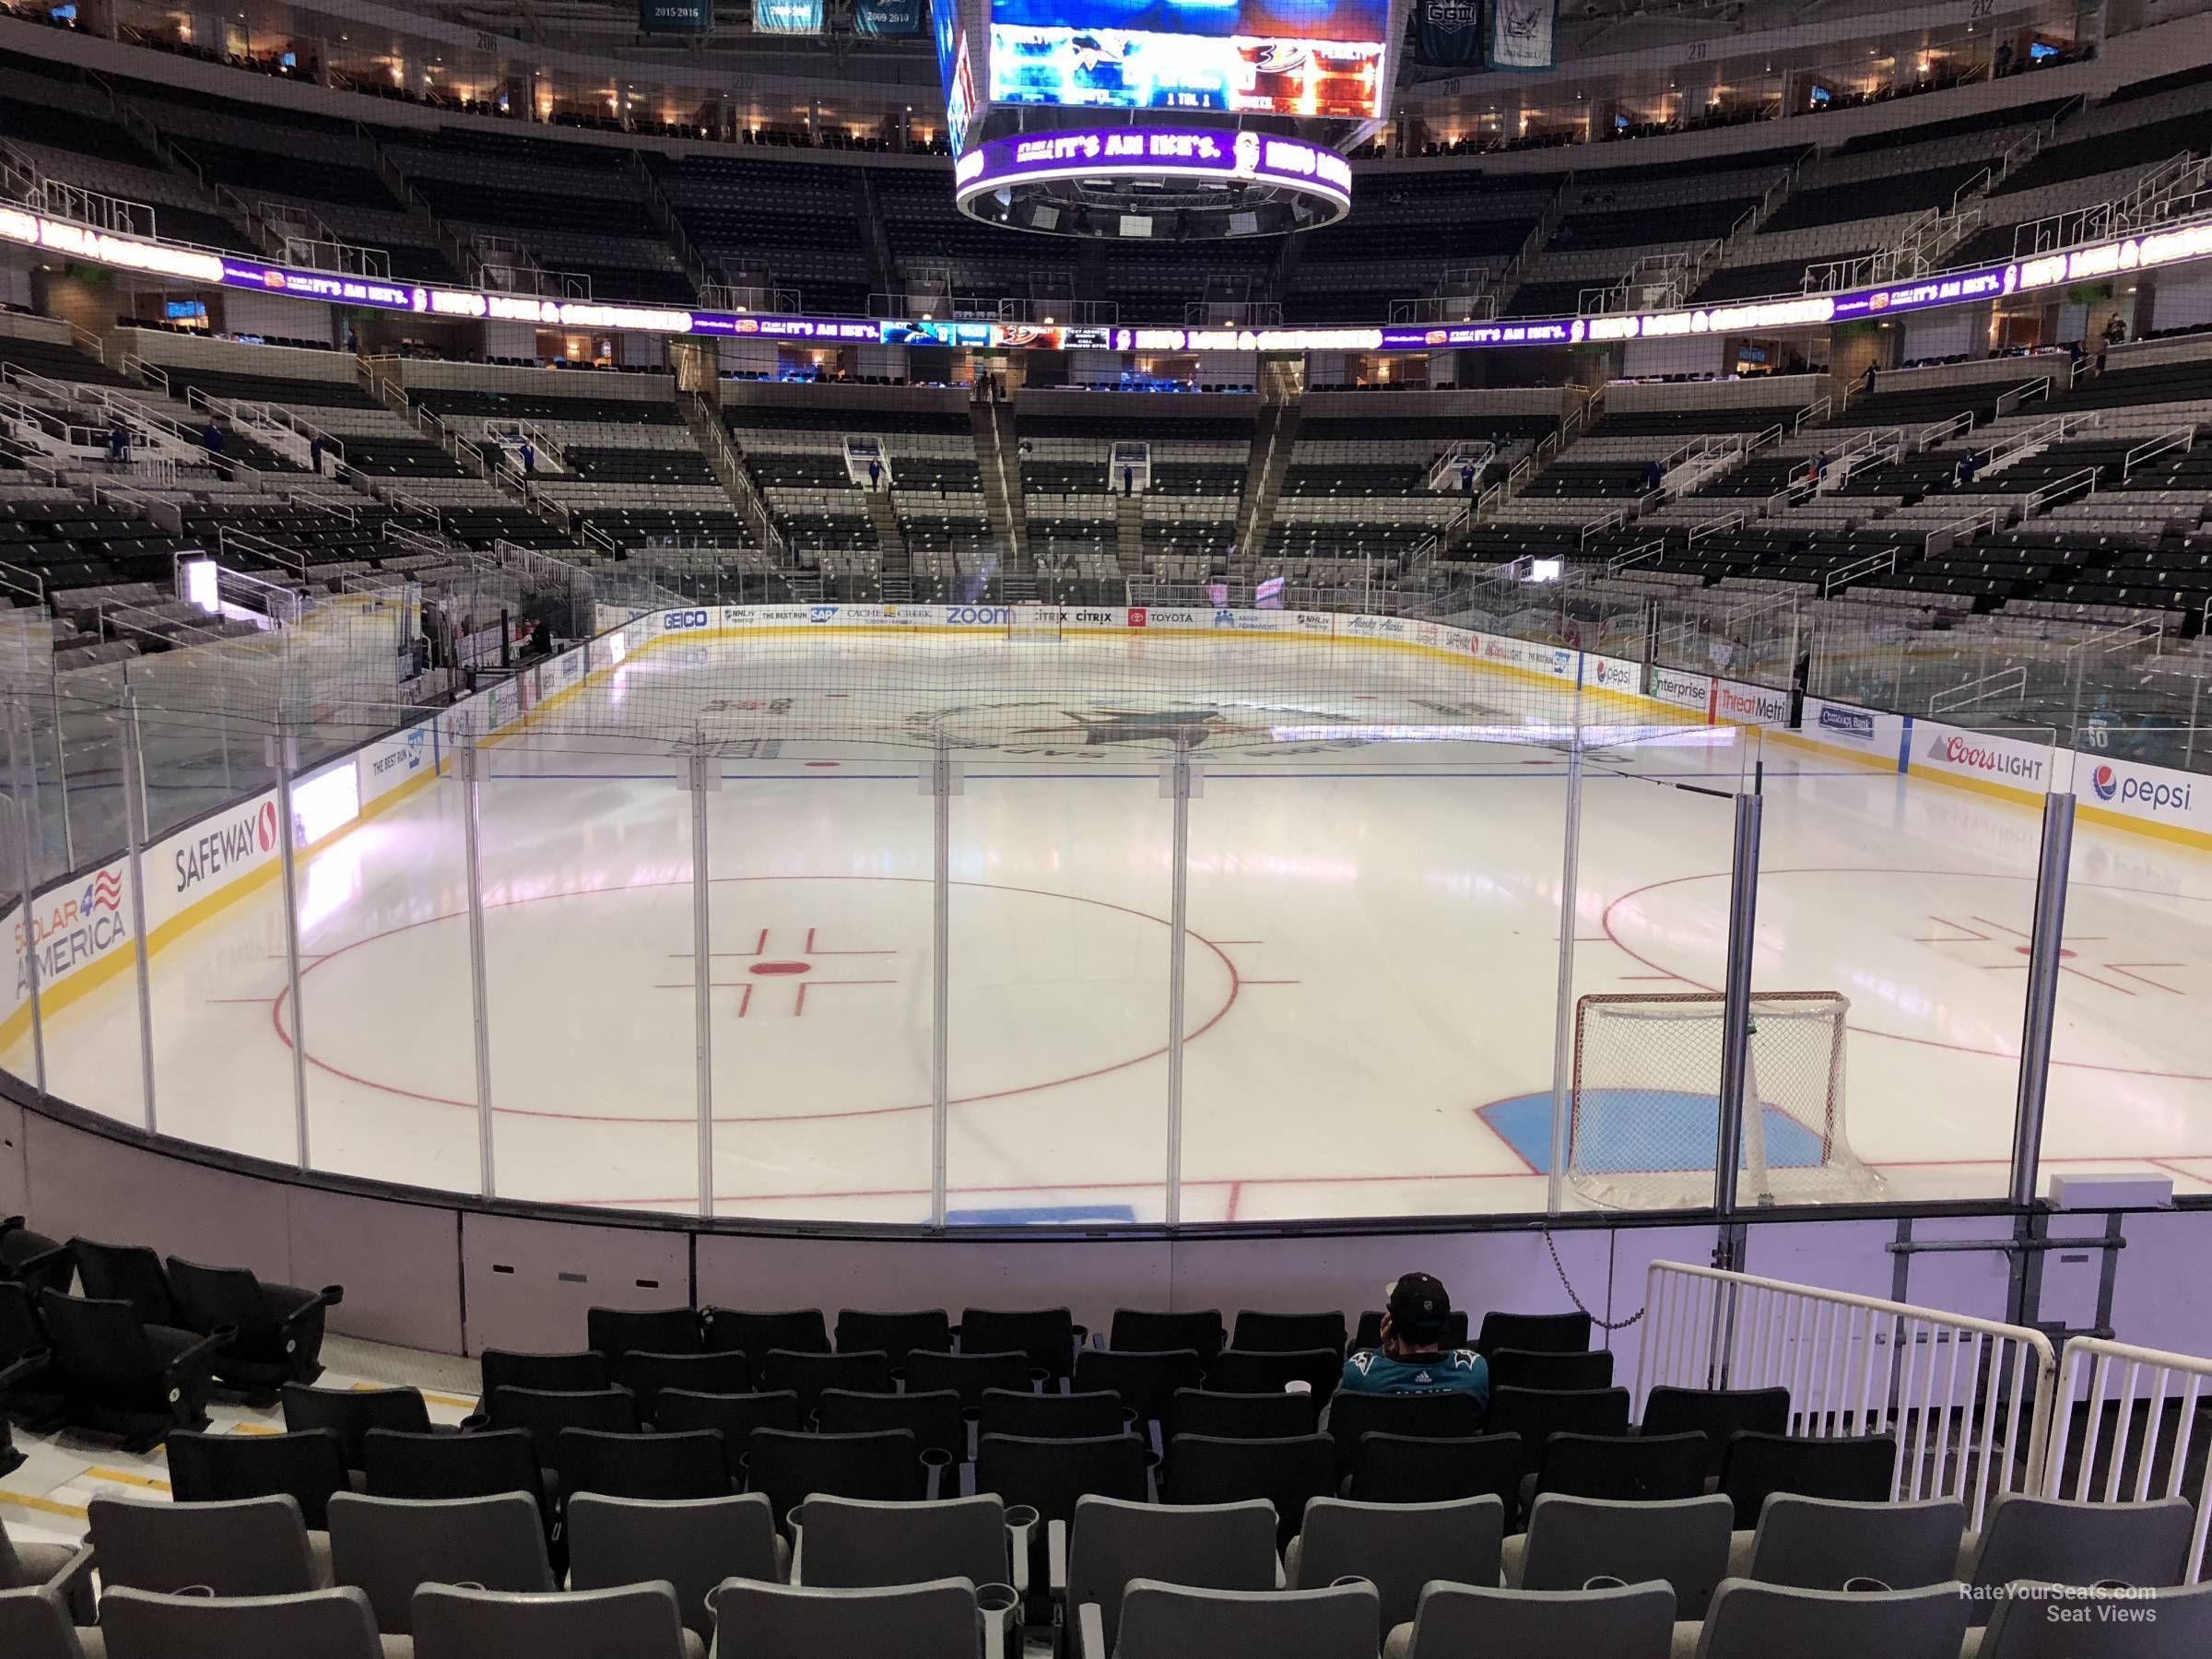 section 123, row 10 seat view  for hockey - sap center